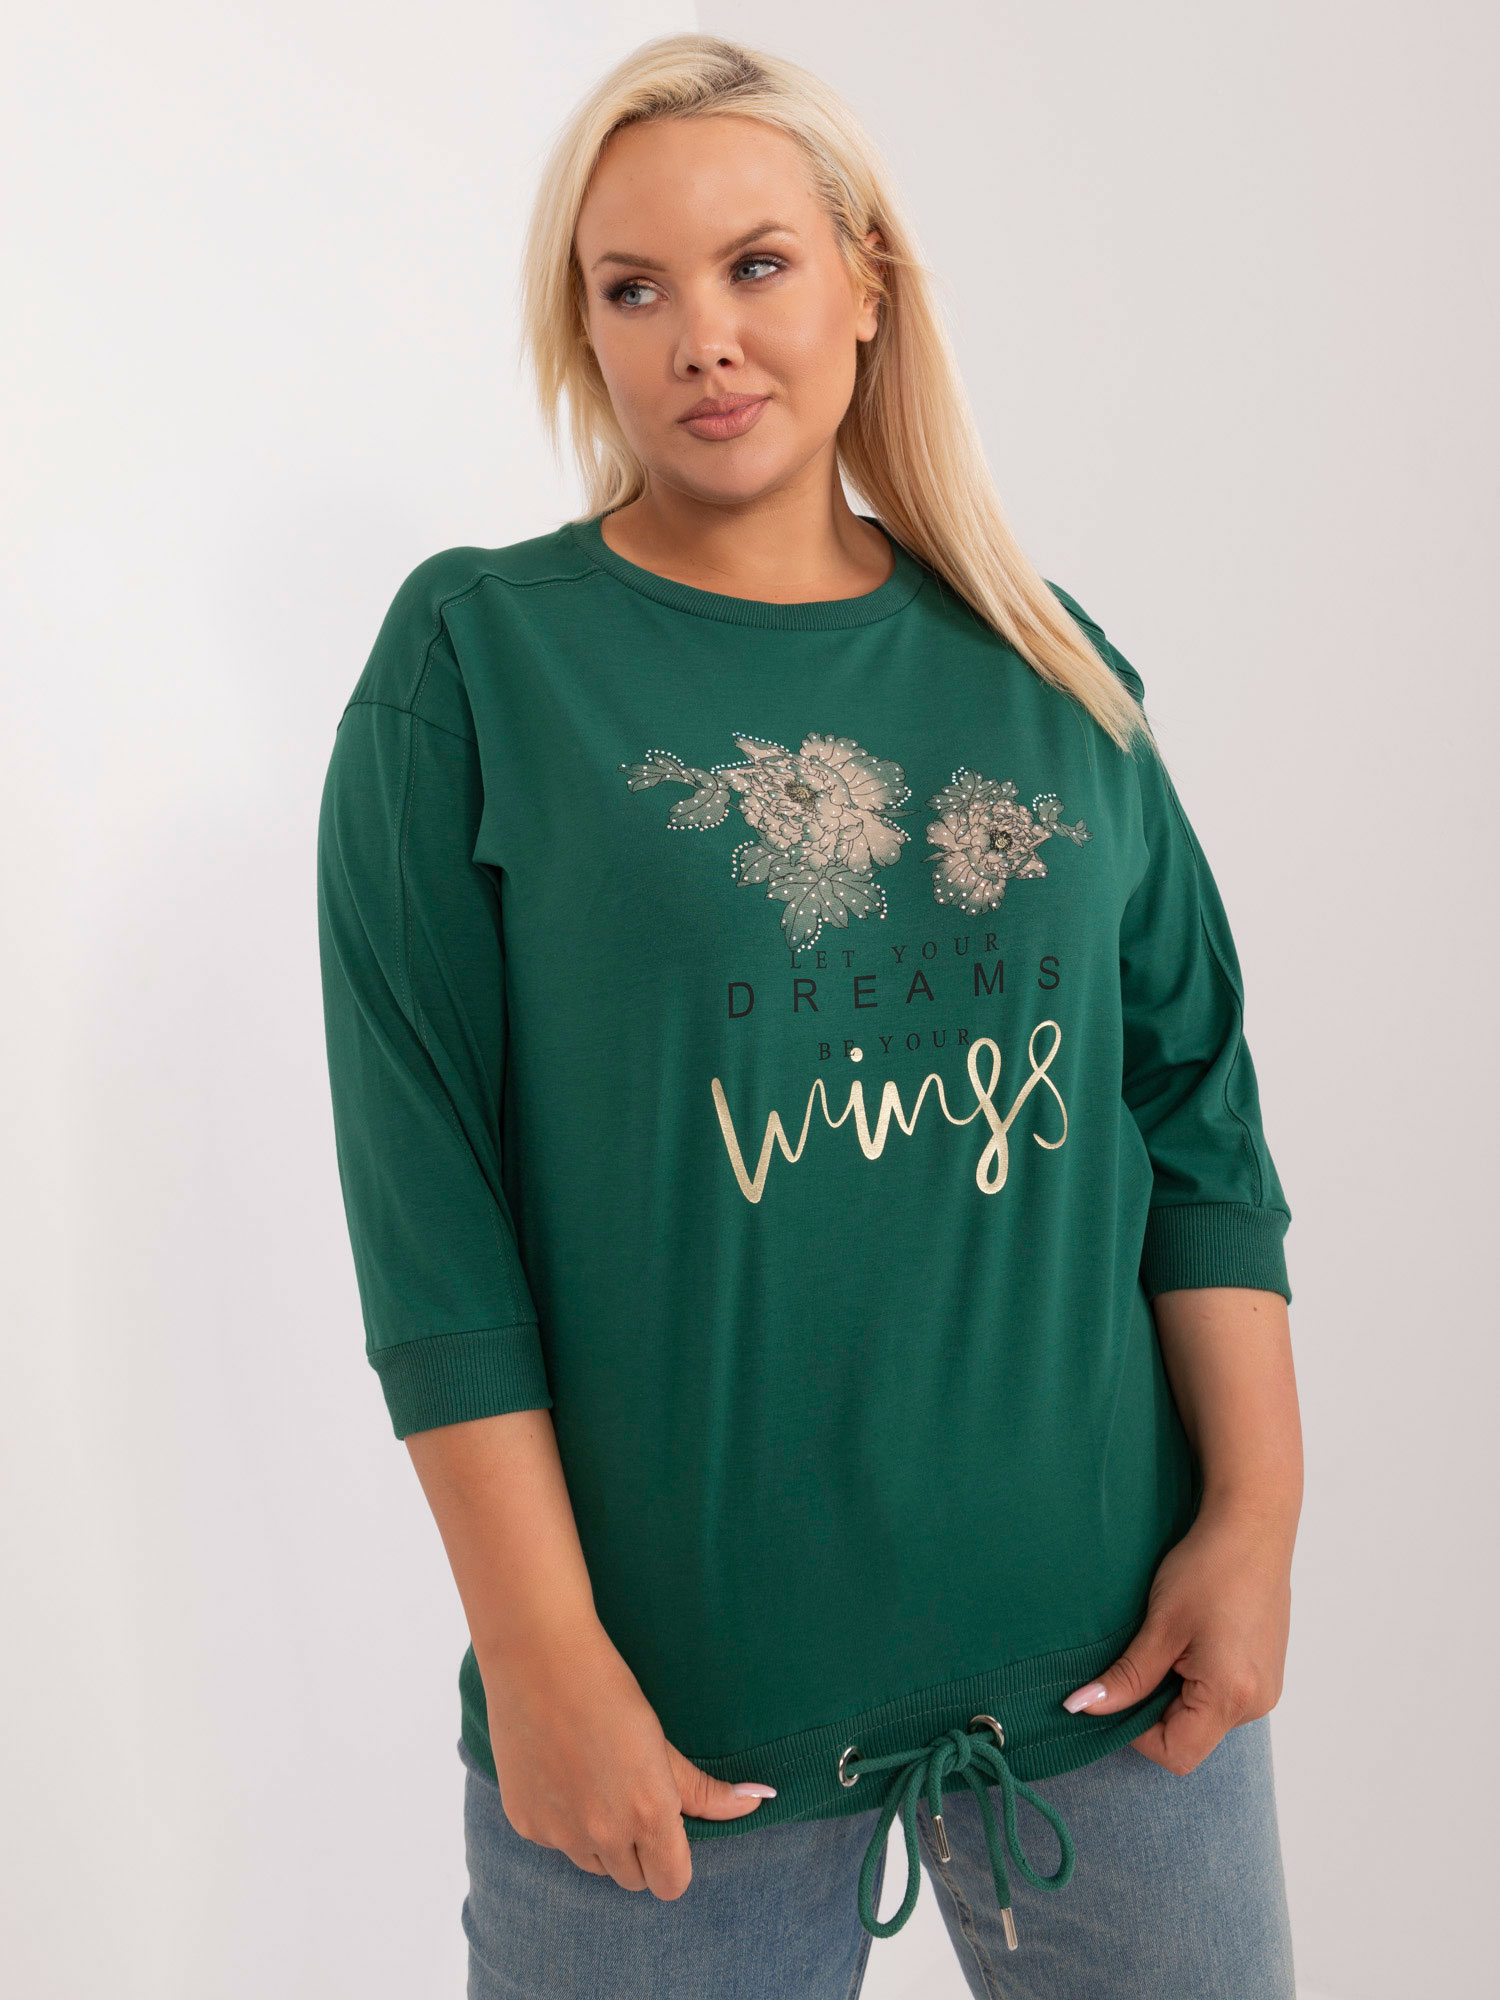 Dark green plus size blouse with inscription